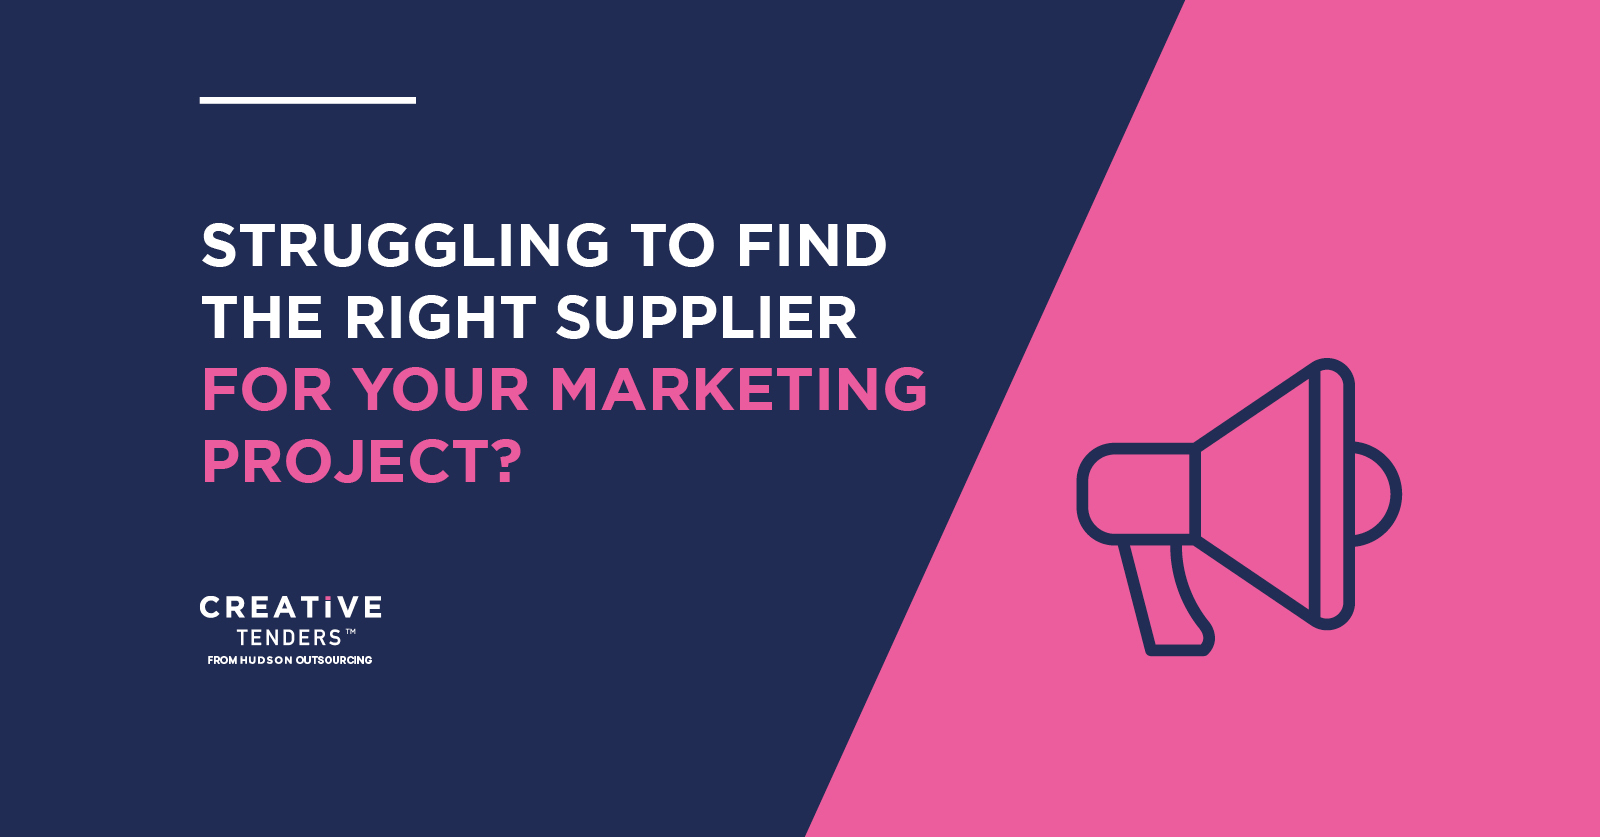 Struggling to find the right supplier for your marketing project?